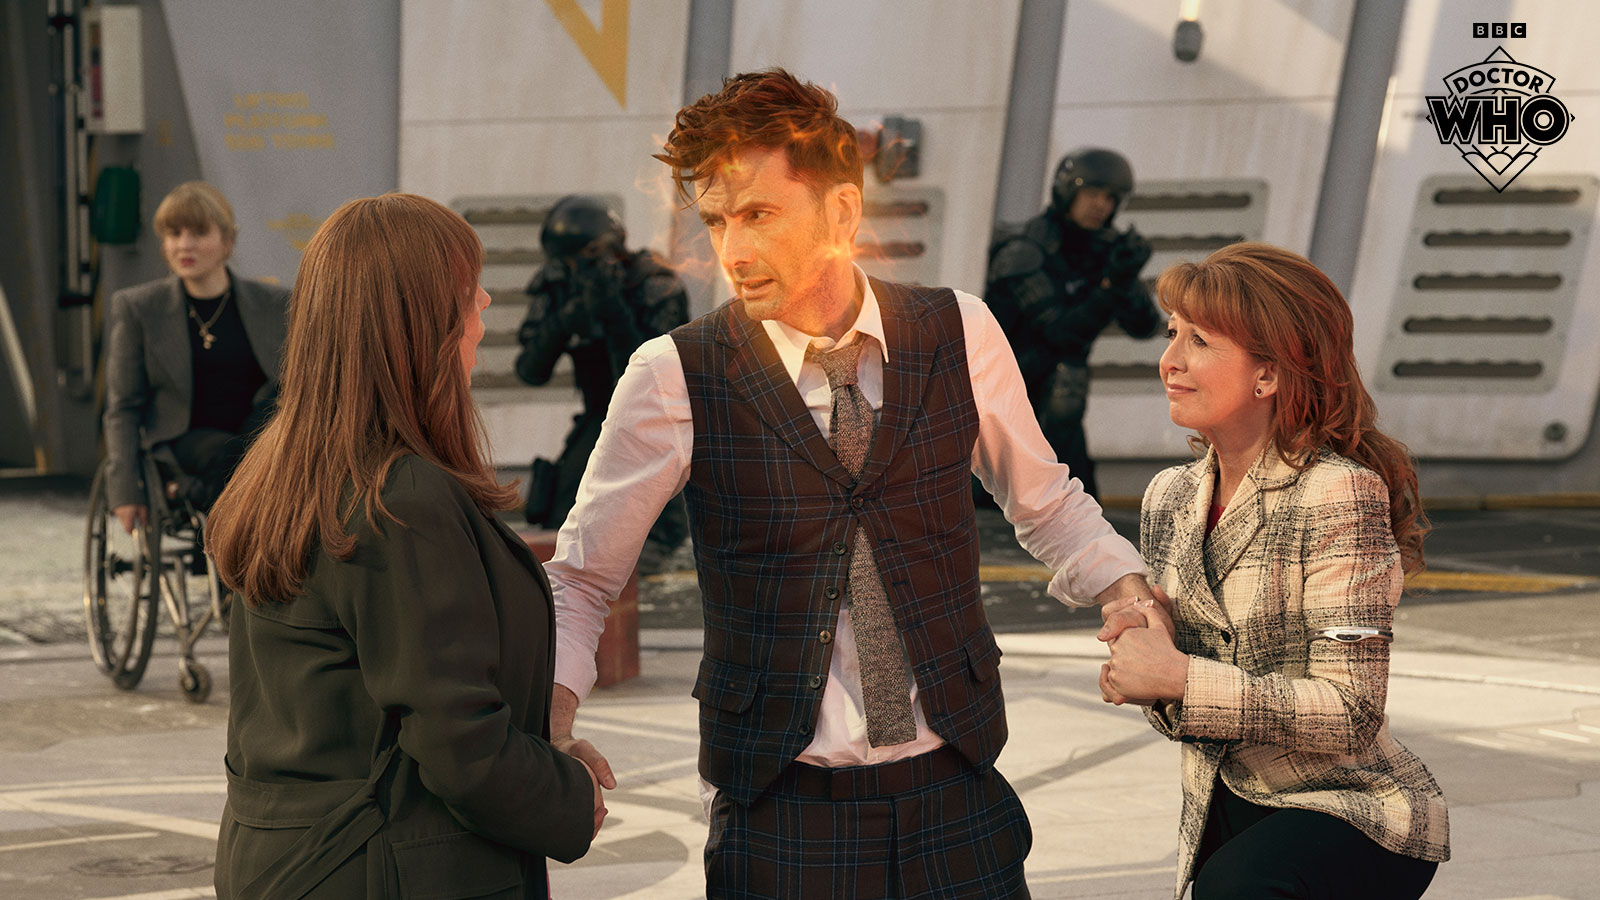 Donna (Catherine Tate) and Mel (Bonnie Langford) prepare to pull on the arms of the Doctor (David Tennant) as he regenerates in 'The Giggle'.